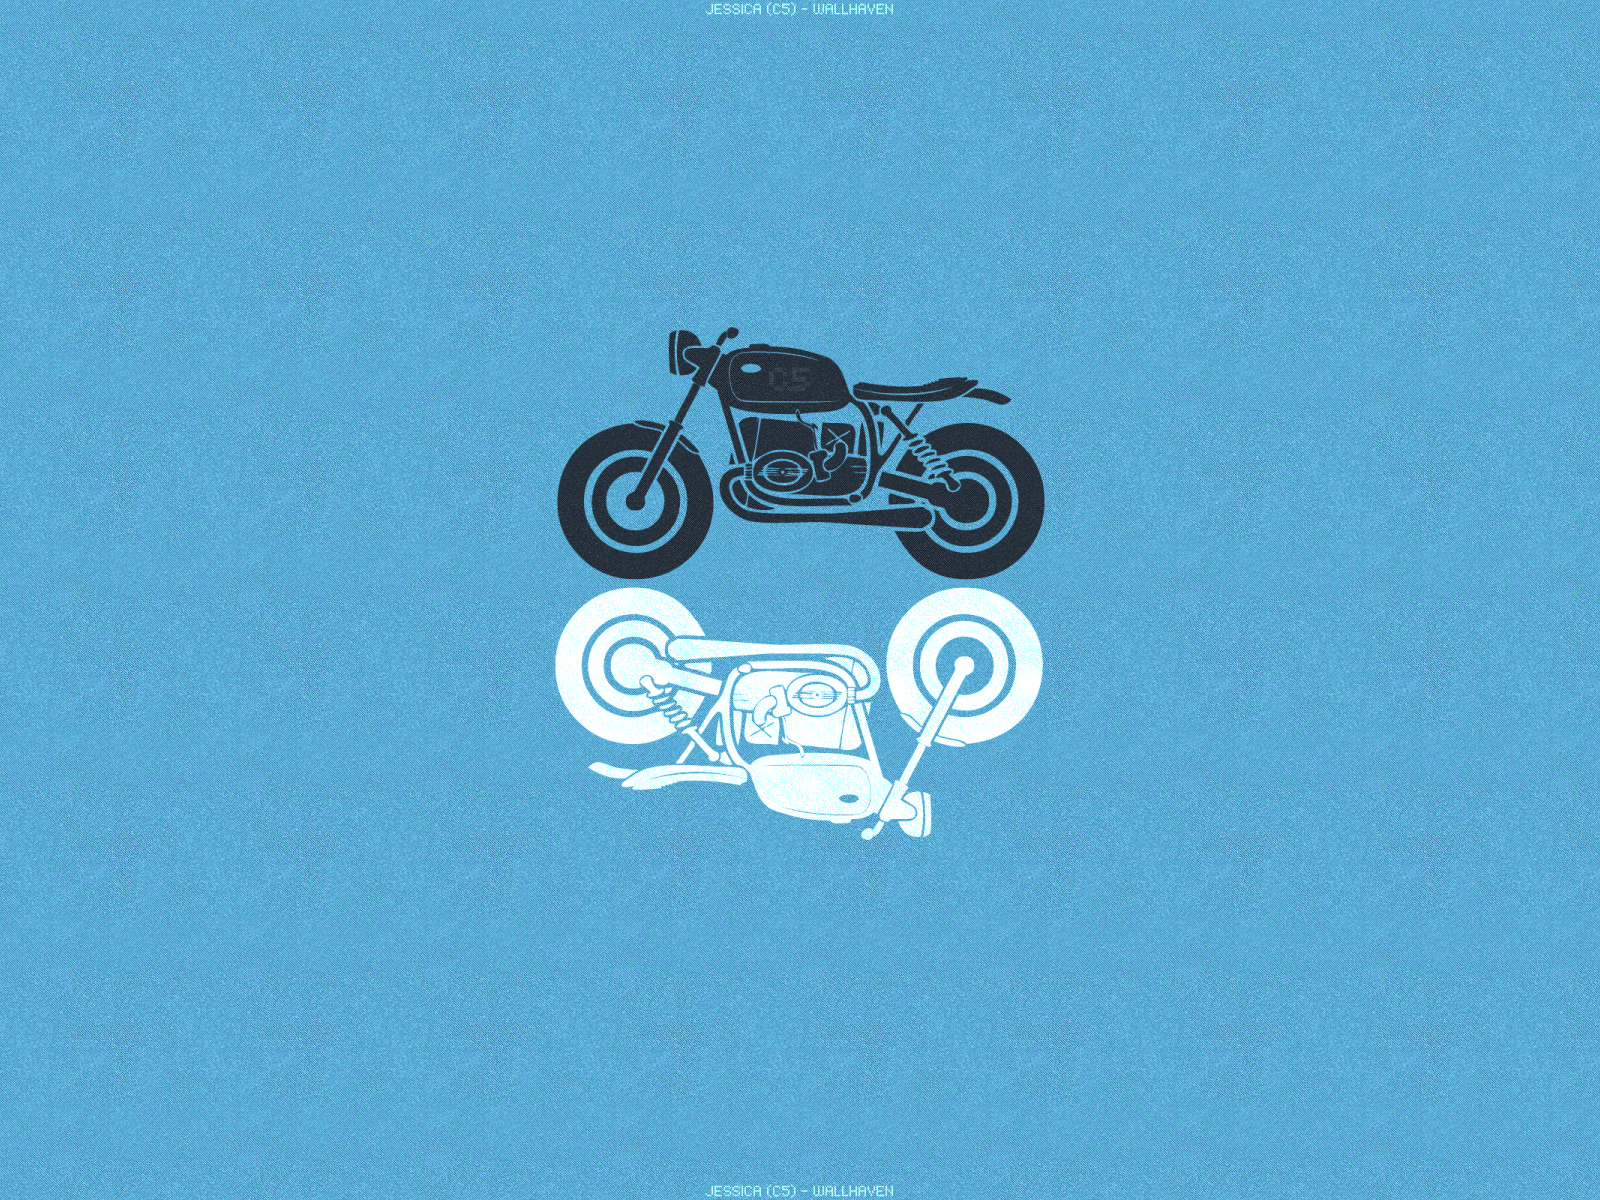 Black and white motorcycle, blue background